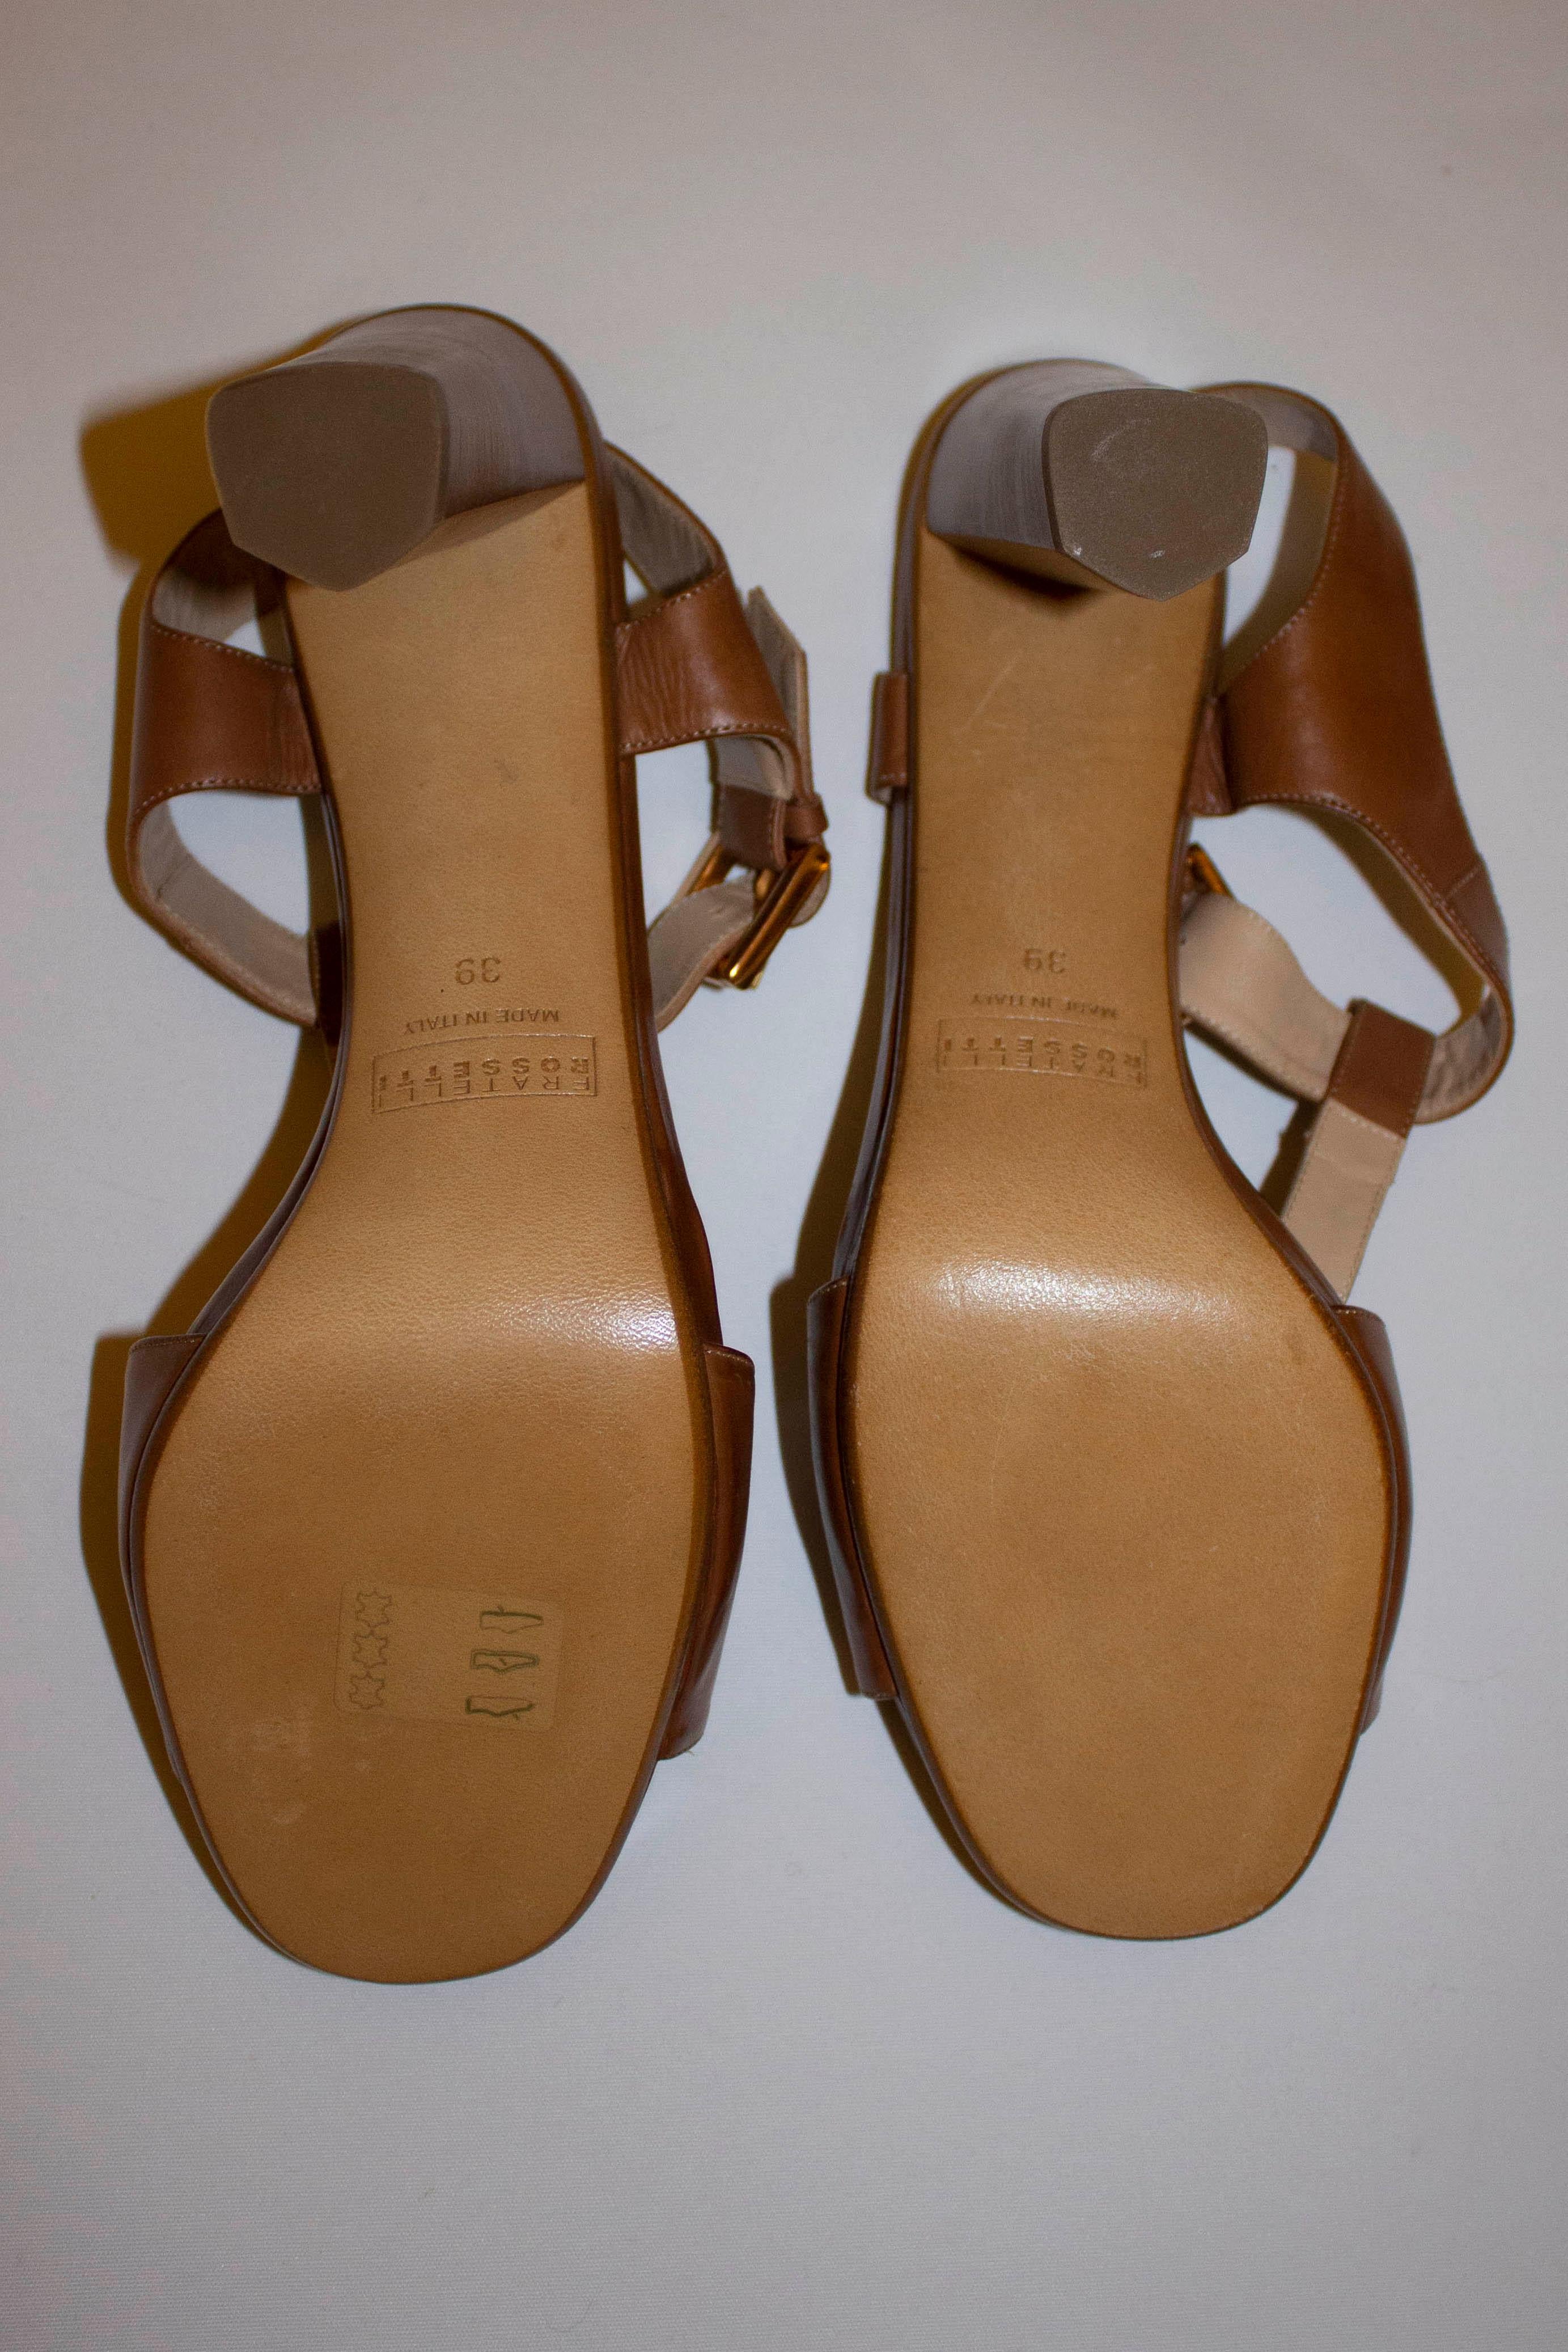 A great pair of sandles by Fratelli Rossetti , in a neutral tan and wonderful leather.
They  are size 39 with a 4 1/2'' heel.